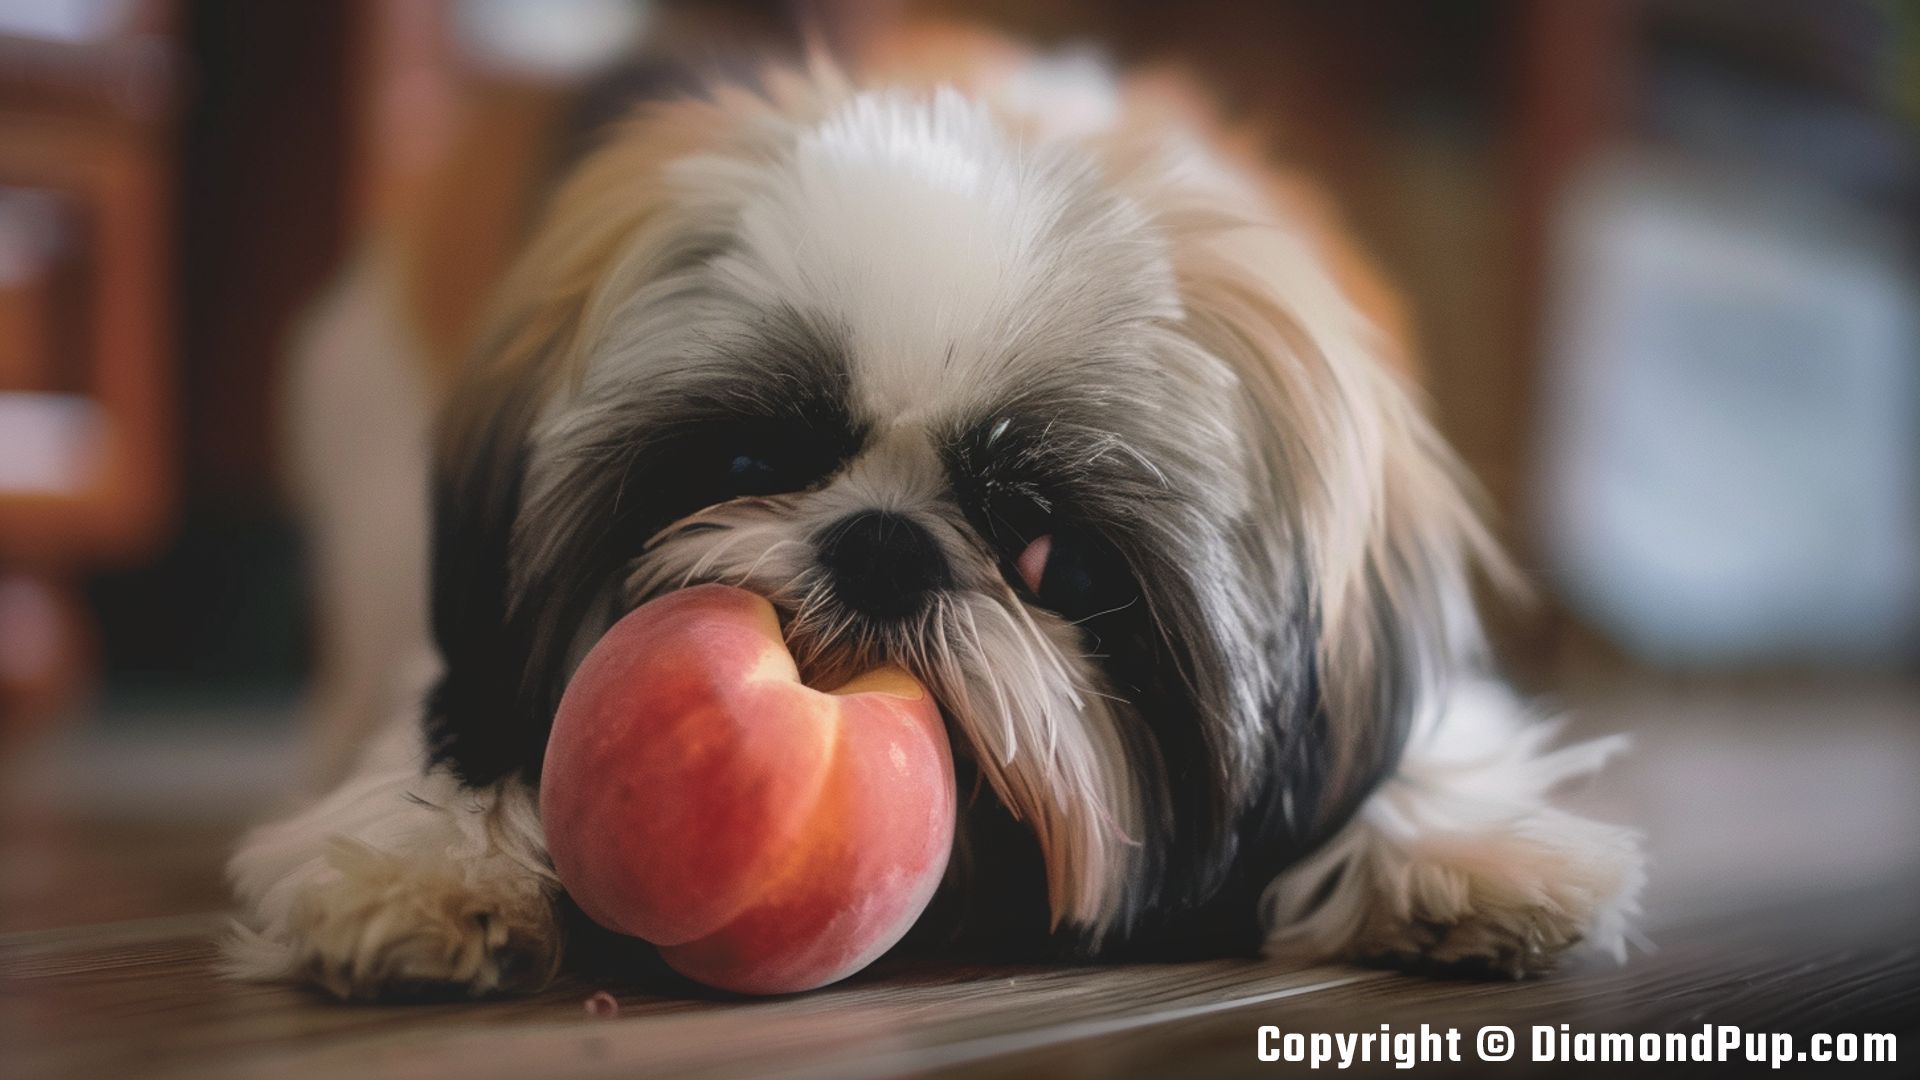 Photograph of an Adorable Shih Tzu Snacking on Peaches